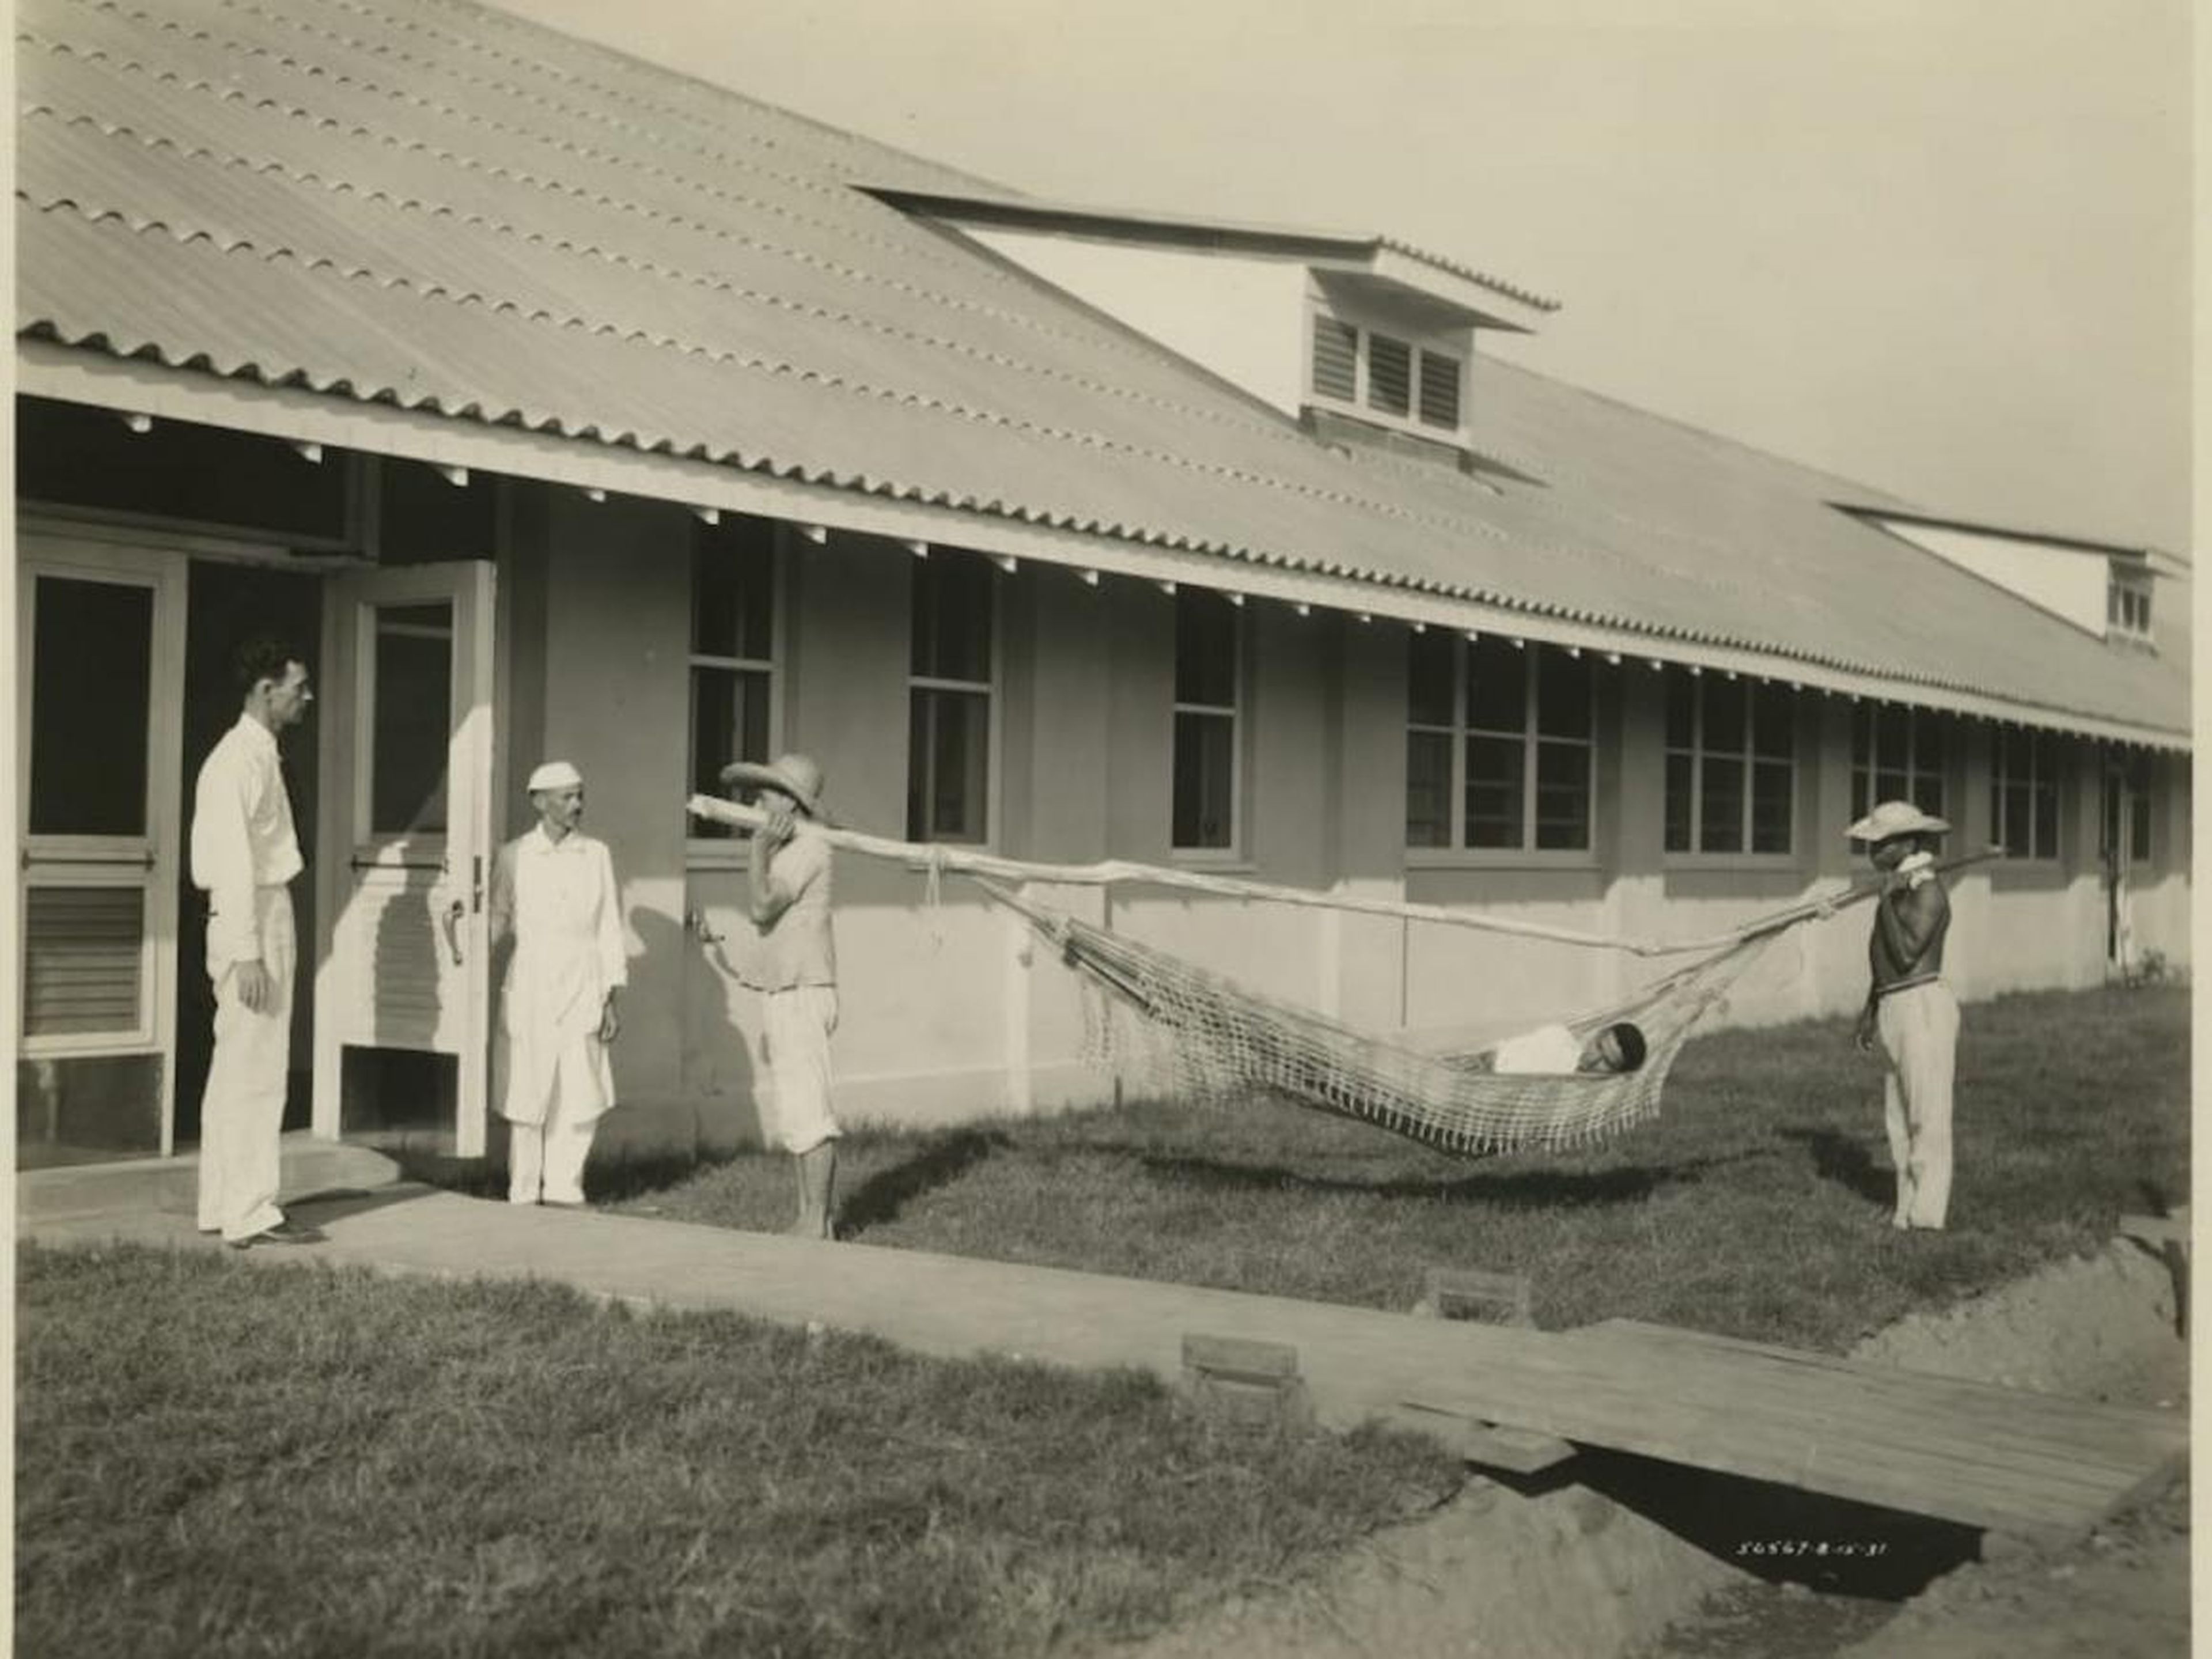 A Brazilian being brought to the hospital in Fordlandia to receive treatment.